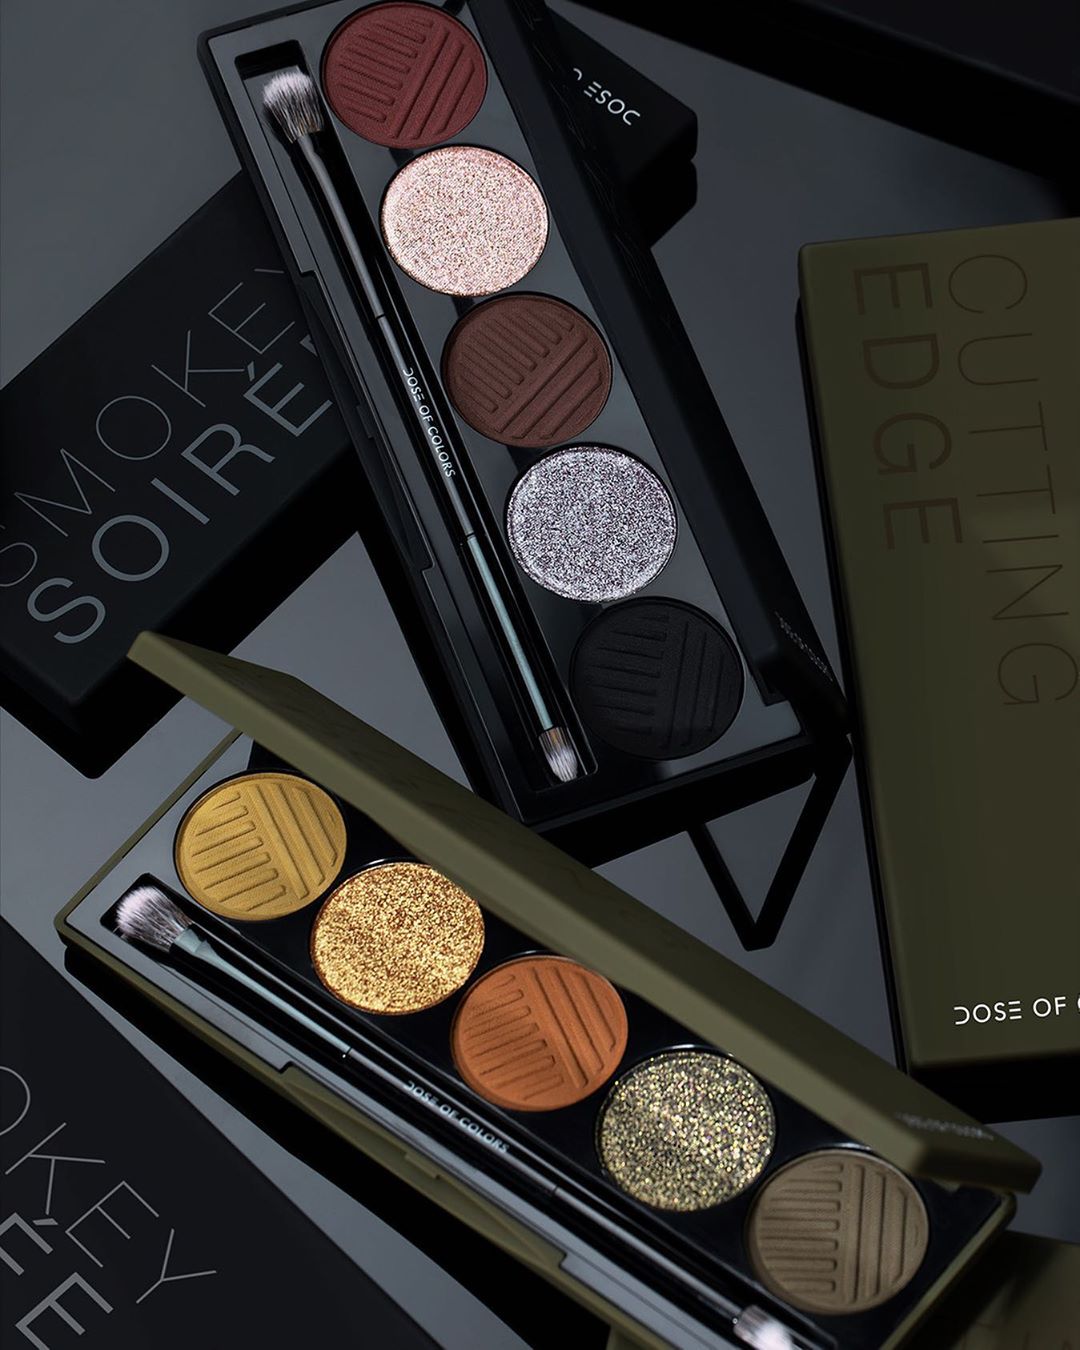 DOSE of COLORS - THEY'RE HERE! SMOKEY SOIRÉE & CUTTING EDGE - OUR TWO NEW EYESHADOW PALETTES! GET READY TO GIVE YOUR EYE'S THE ATTENTION THEY'VE BEEN CRAVING...
AVAILABLE NOW ON DOSEOFCOLORS.COM
#Dose...